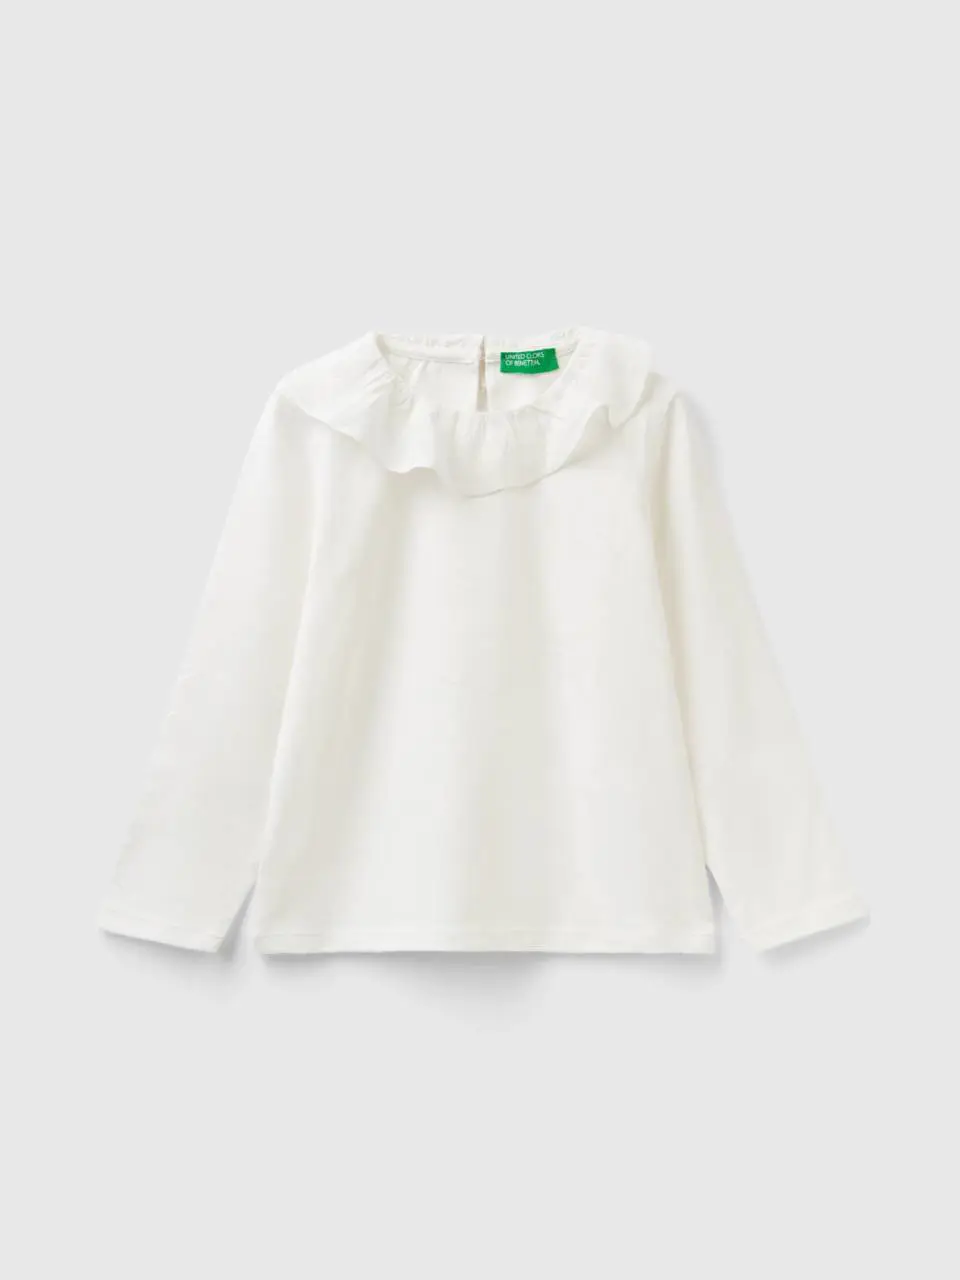 Benetton t-shirt with trimmed collar. 1